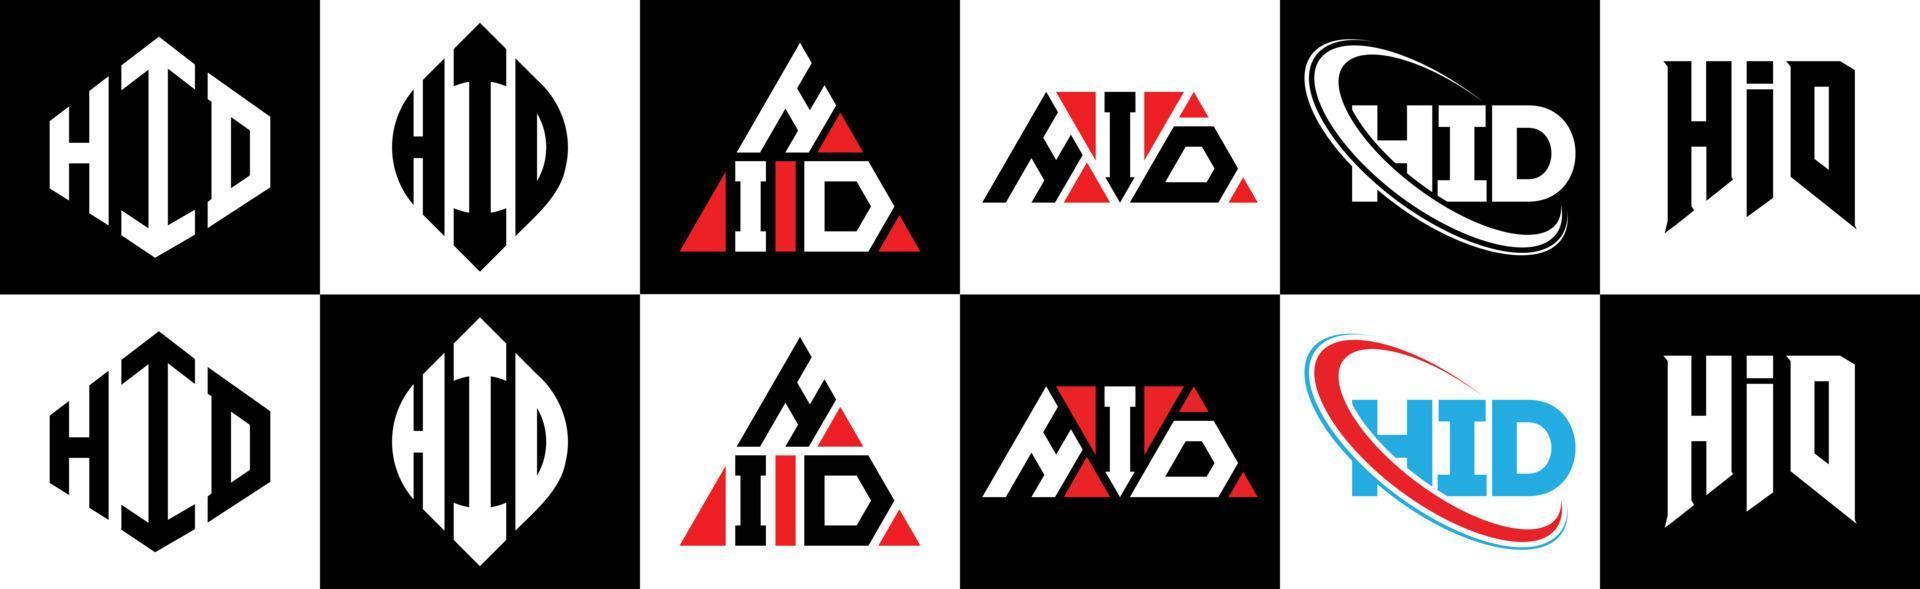 HID letter logo design in six style. HID polygon, circle, triangle, hexagon, flat and simple style with black and white color variation letter logo set in one artboard. HID minimalist and classic logo vector